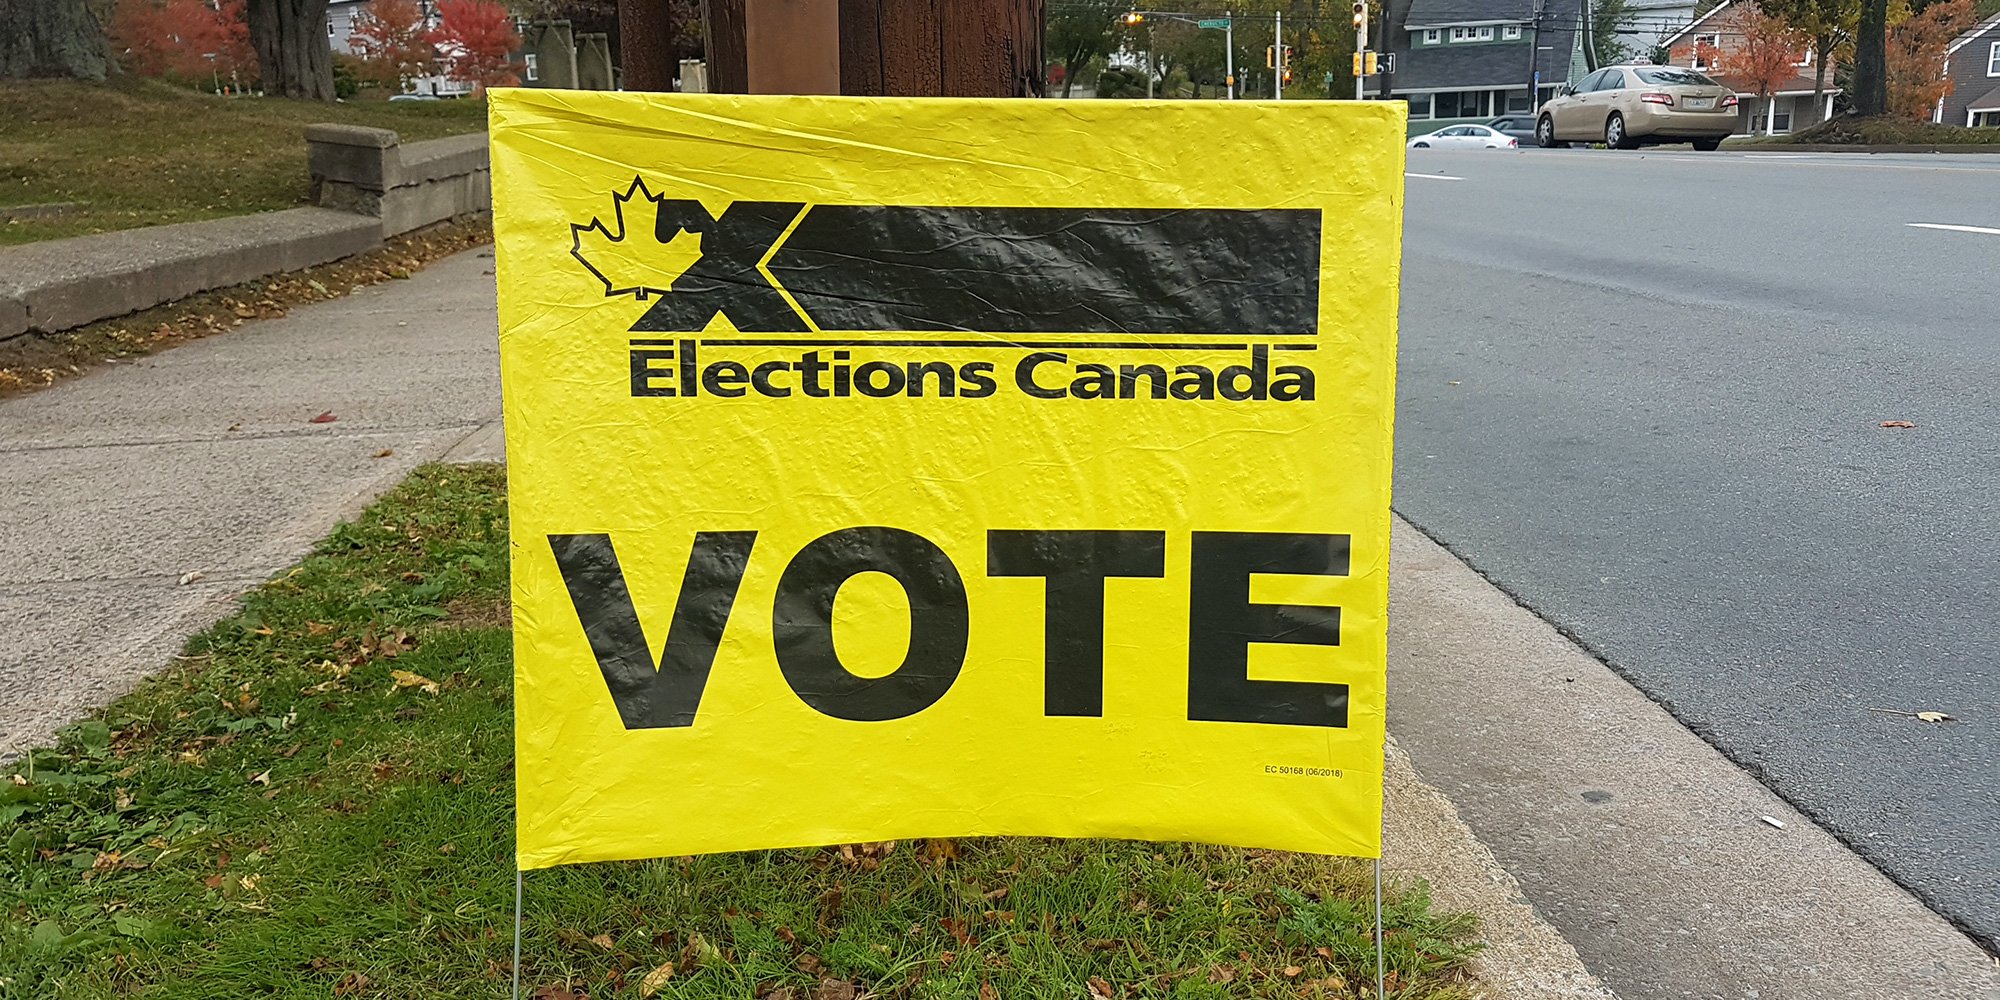 Elections Canada vote sign